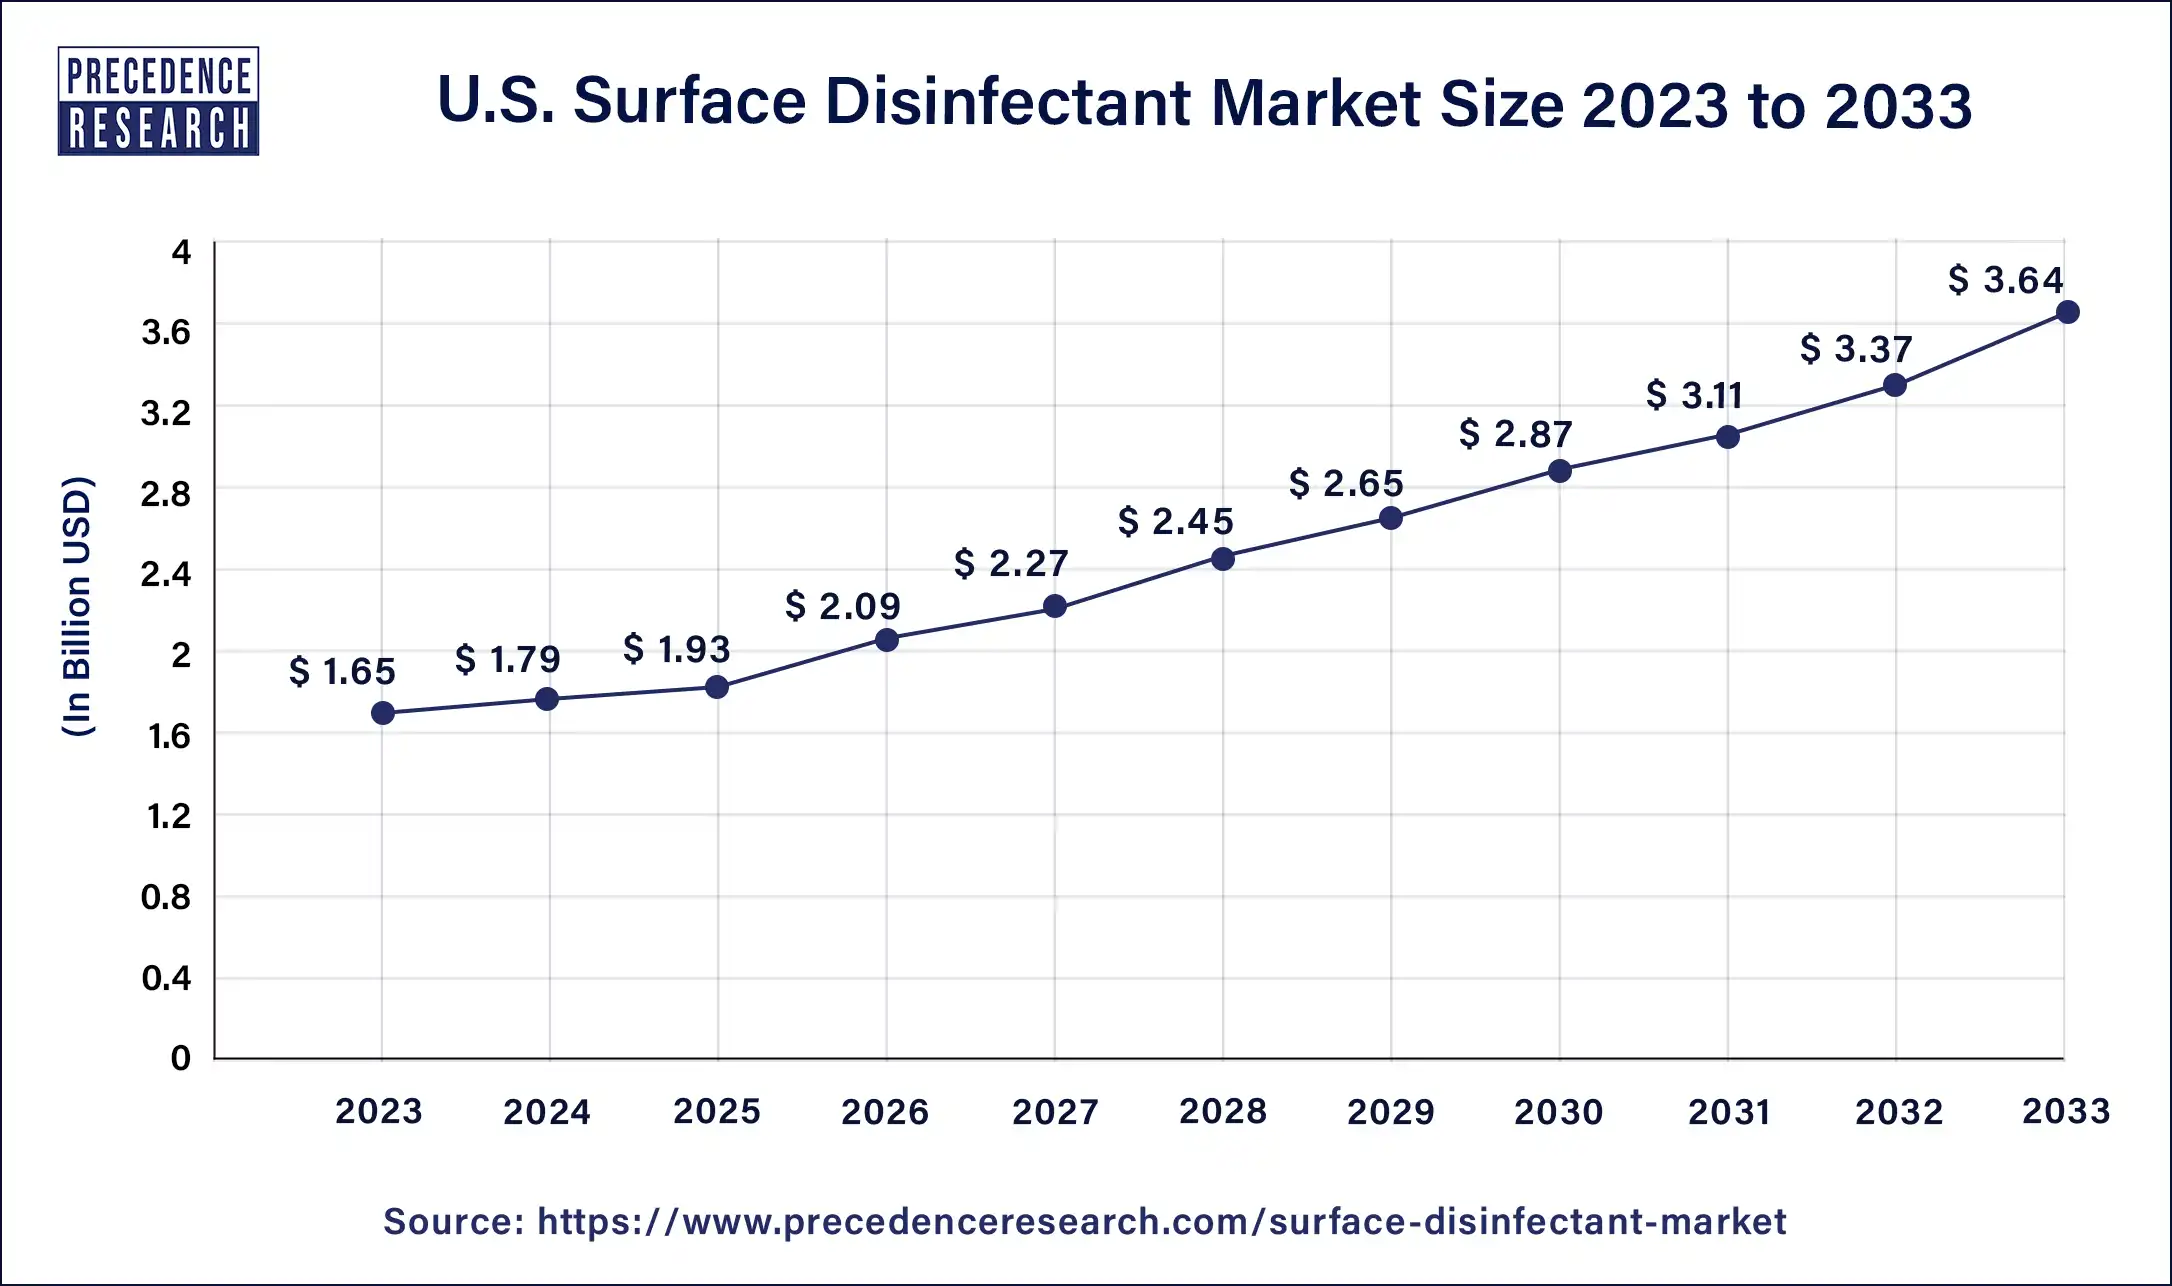 U.S. Surface Disinfectant Market Size 2024 to 2033